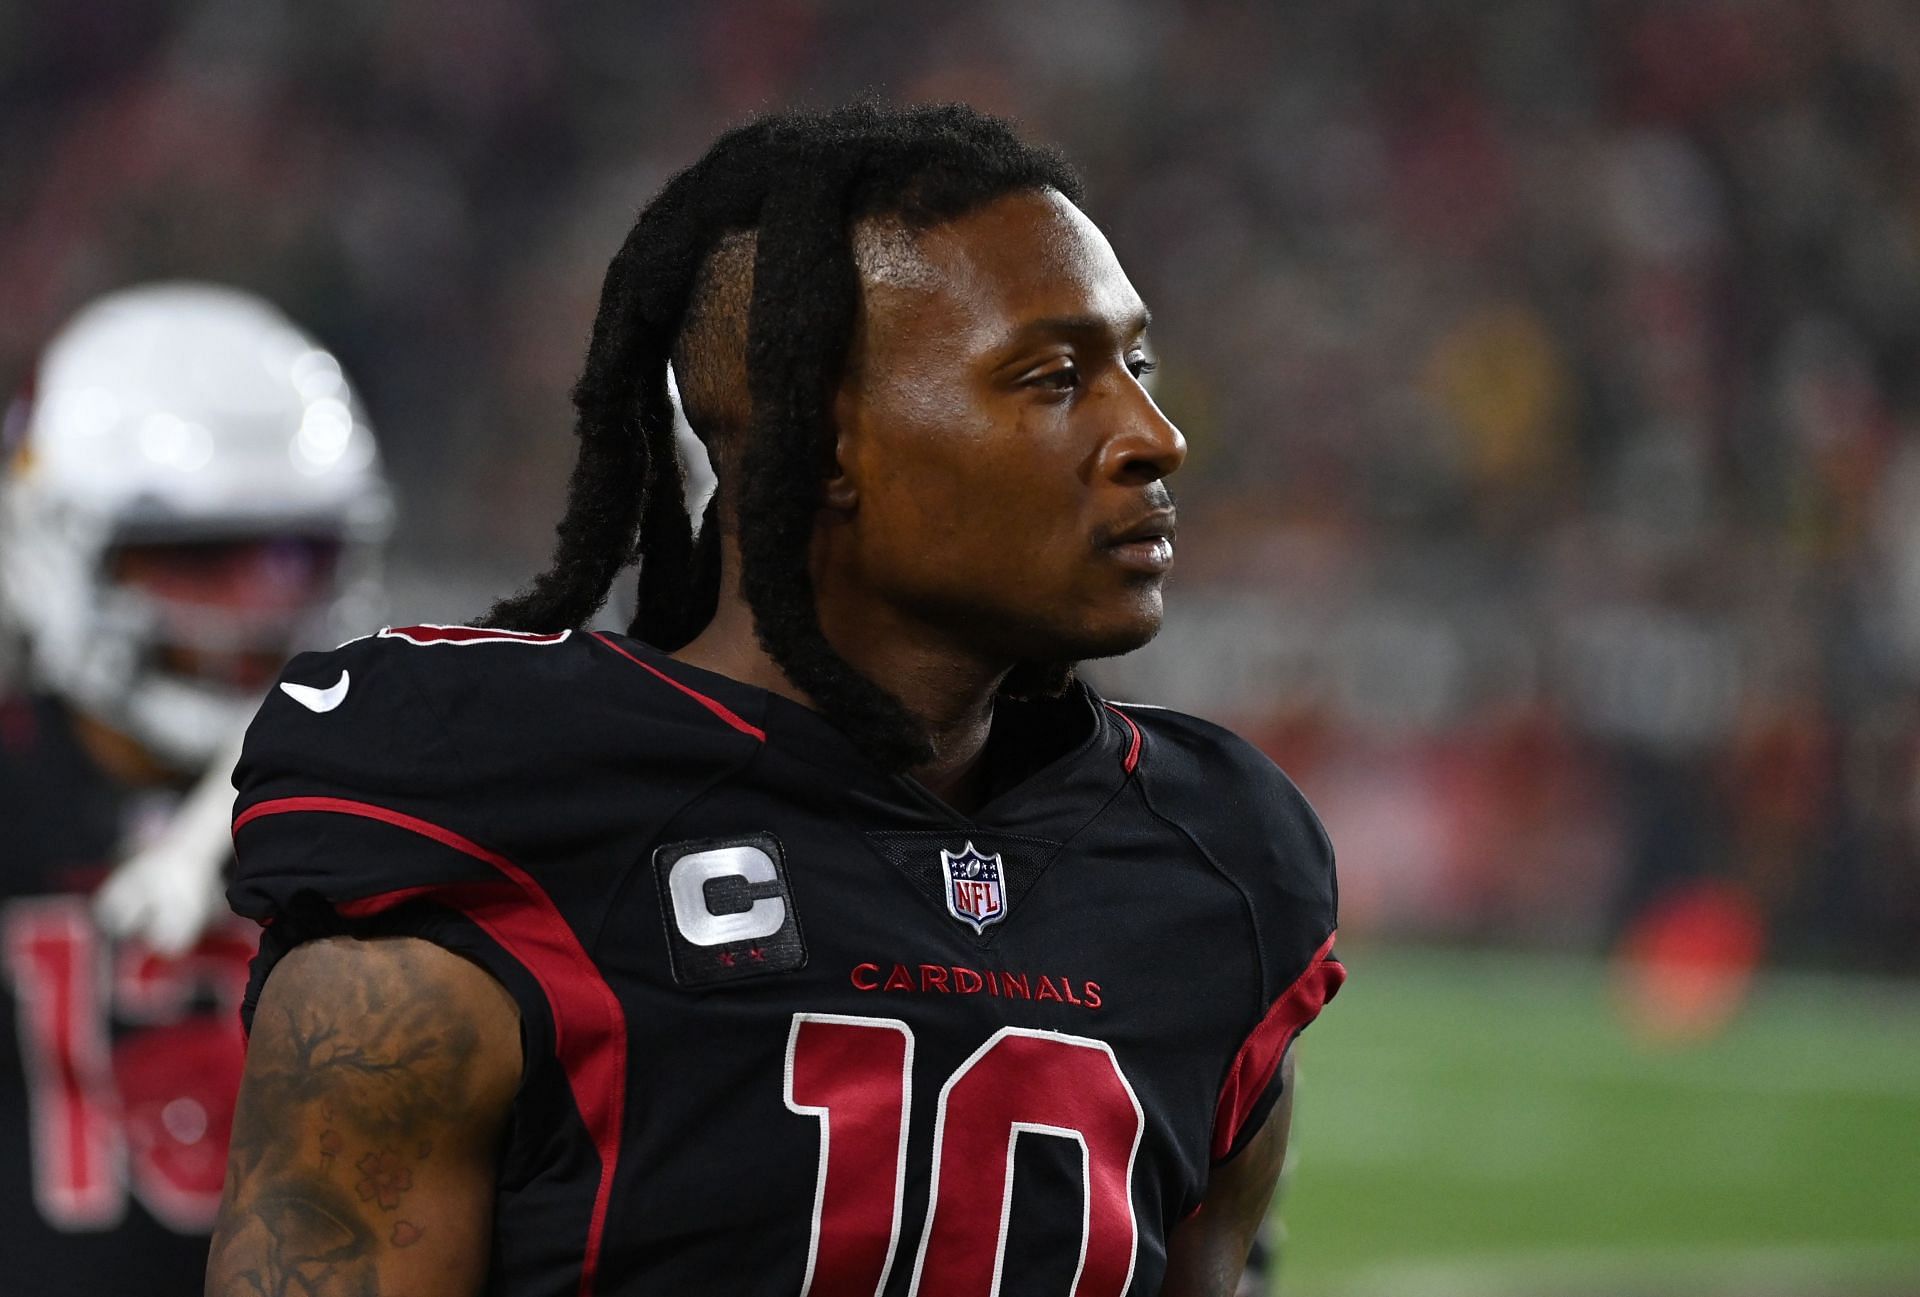 NFL trades: Could DeAndre Hopkins be moved?